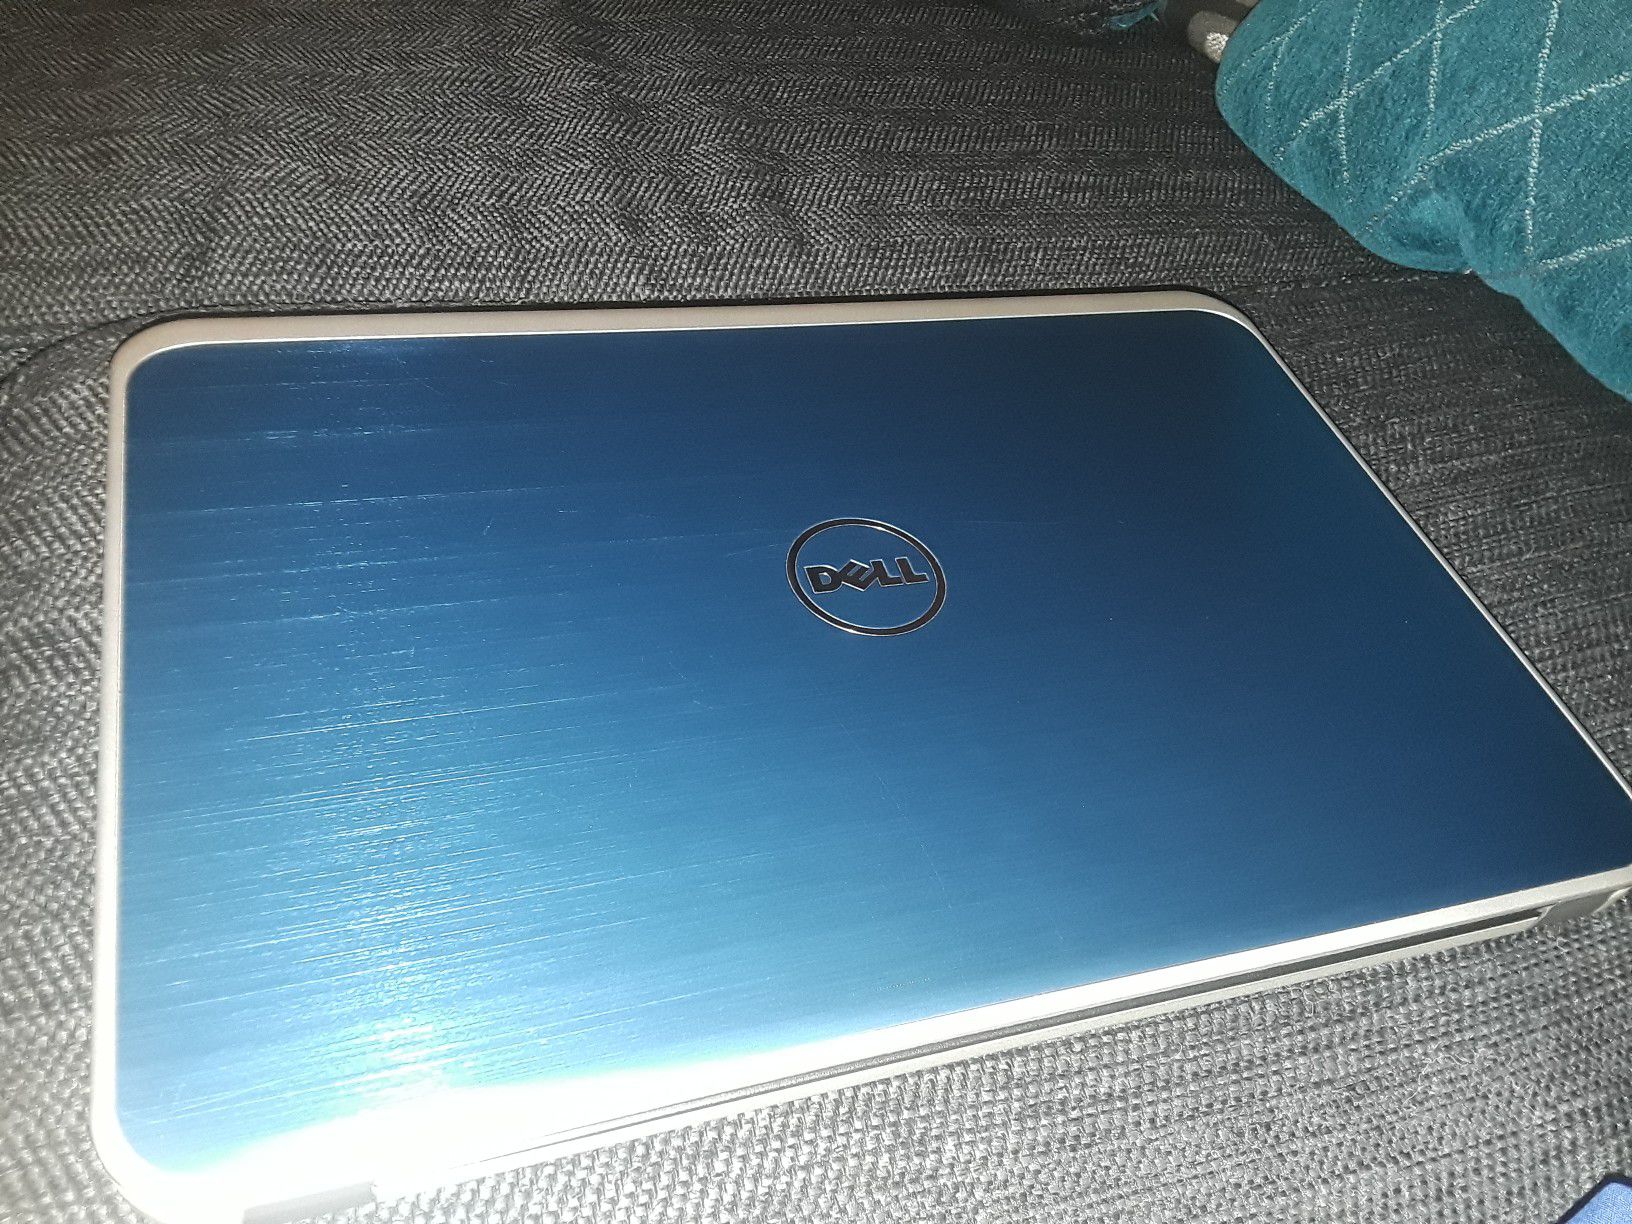 Dell Inspiron Laptop TB HDD 8GB